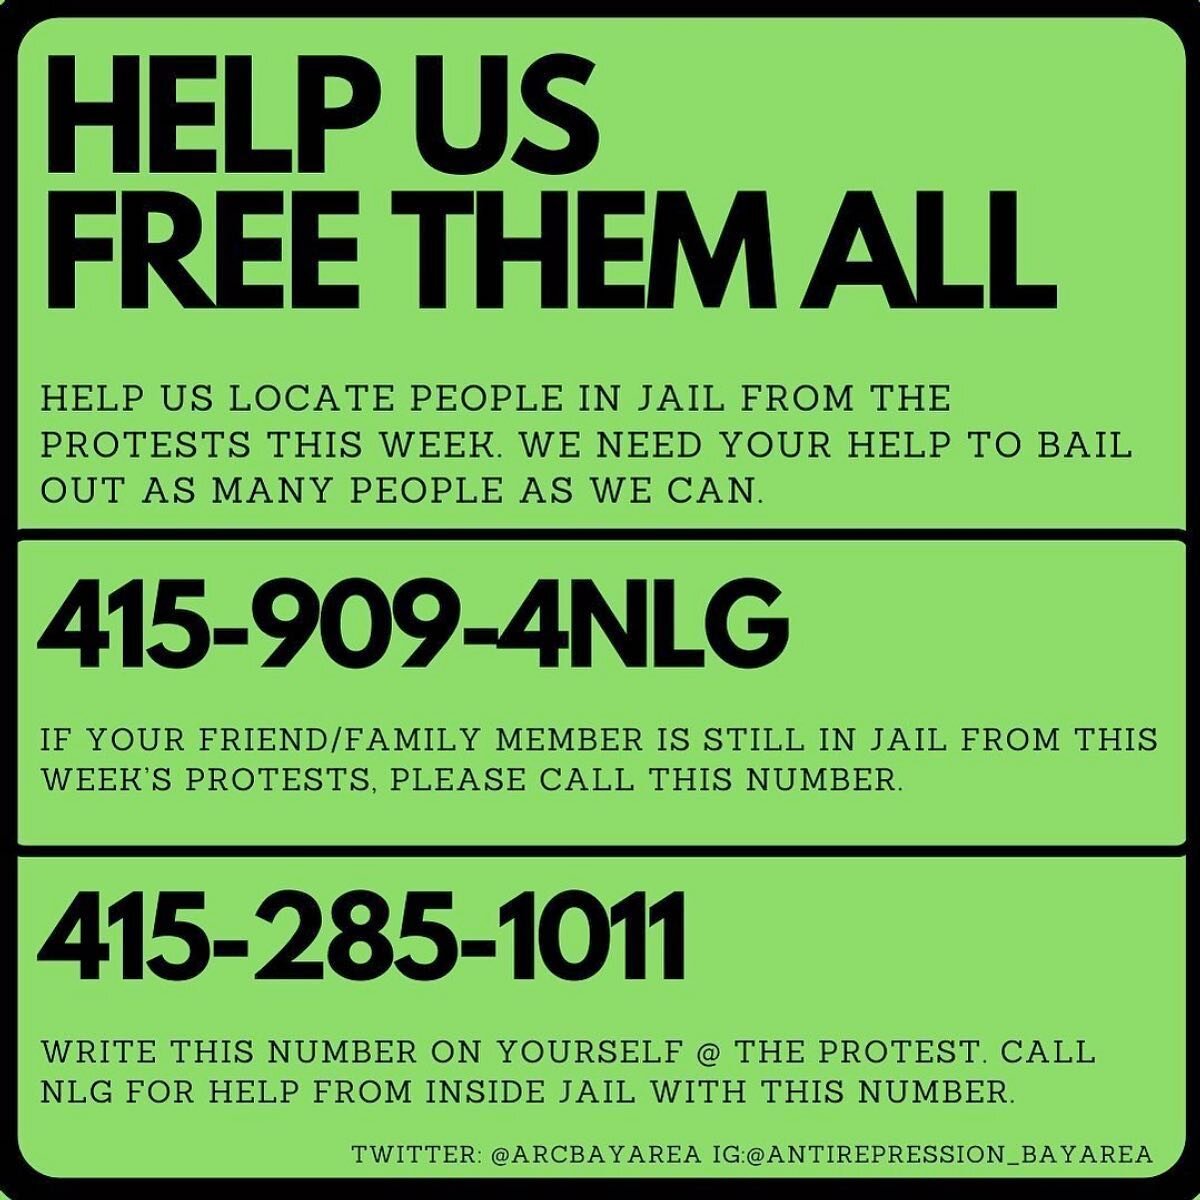 👆🏽👆🏽👆🏽Where to donate! Write 415-285-1011 on your arm to contact @nationallawyersguild if arrested. repost from @antirepression_bayarea